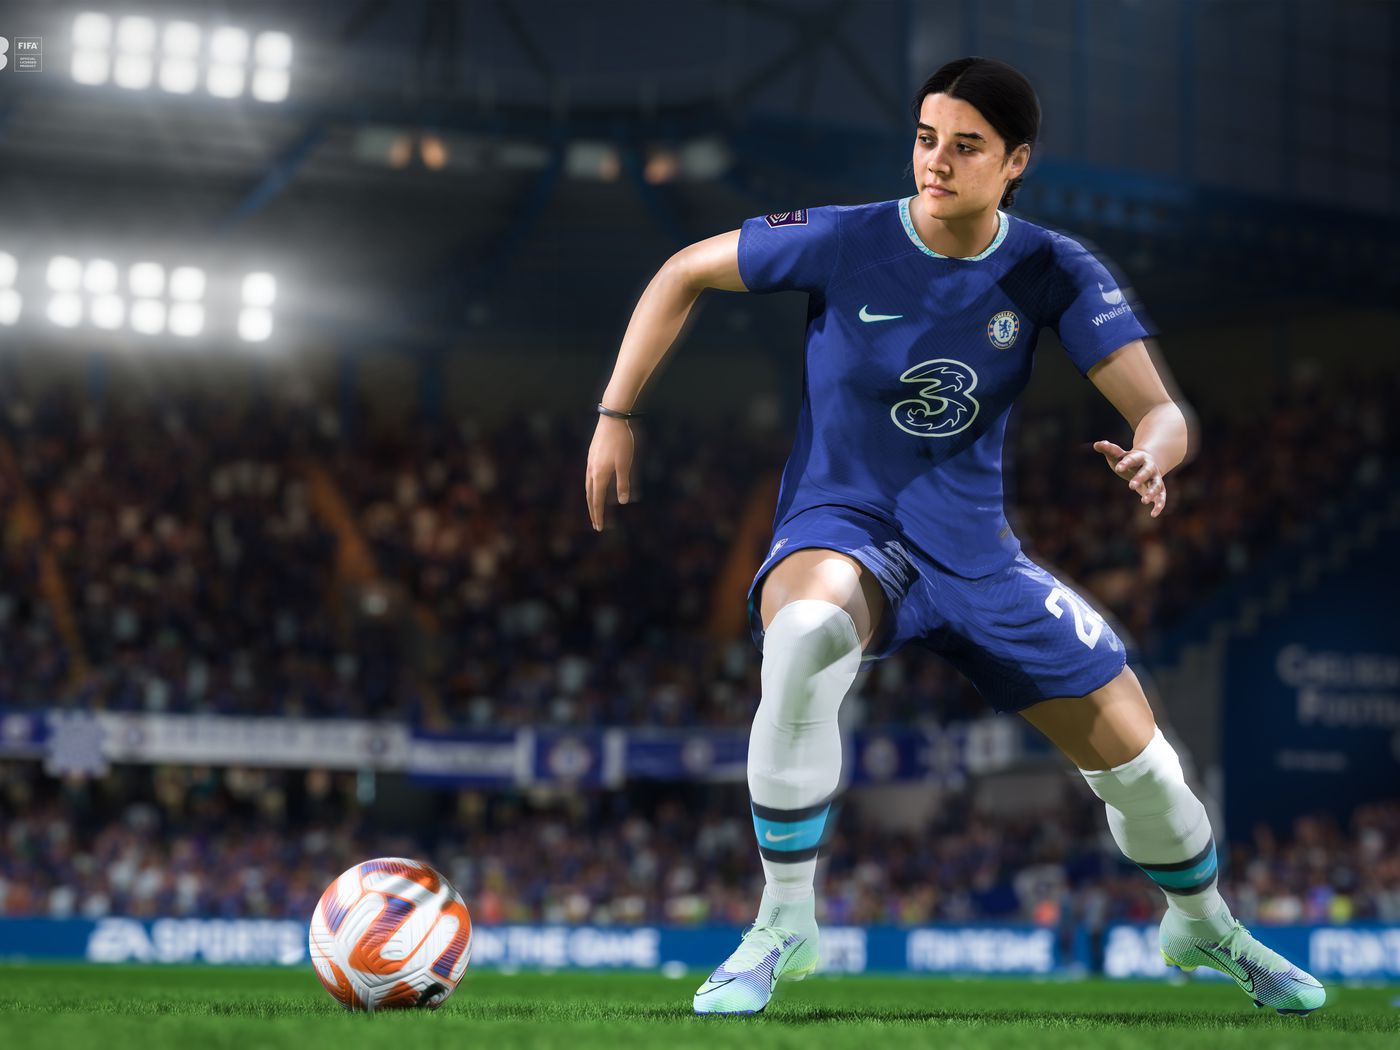 EA's last FIFA game goes all in on women's soccer